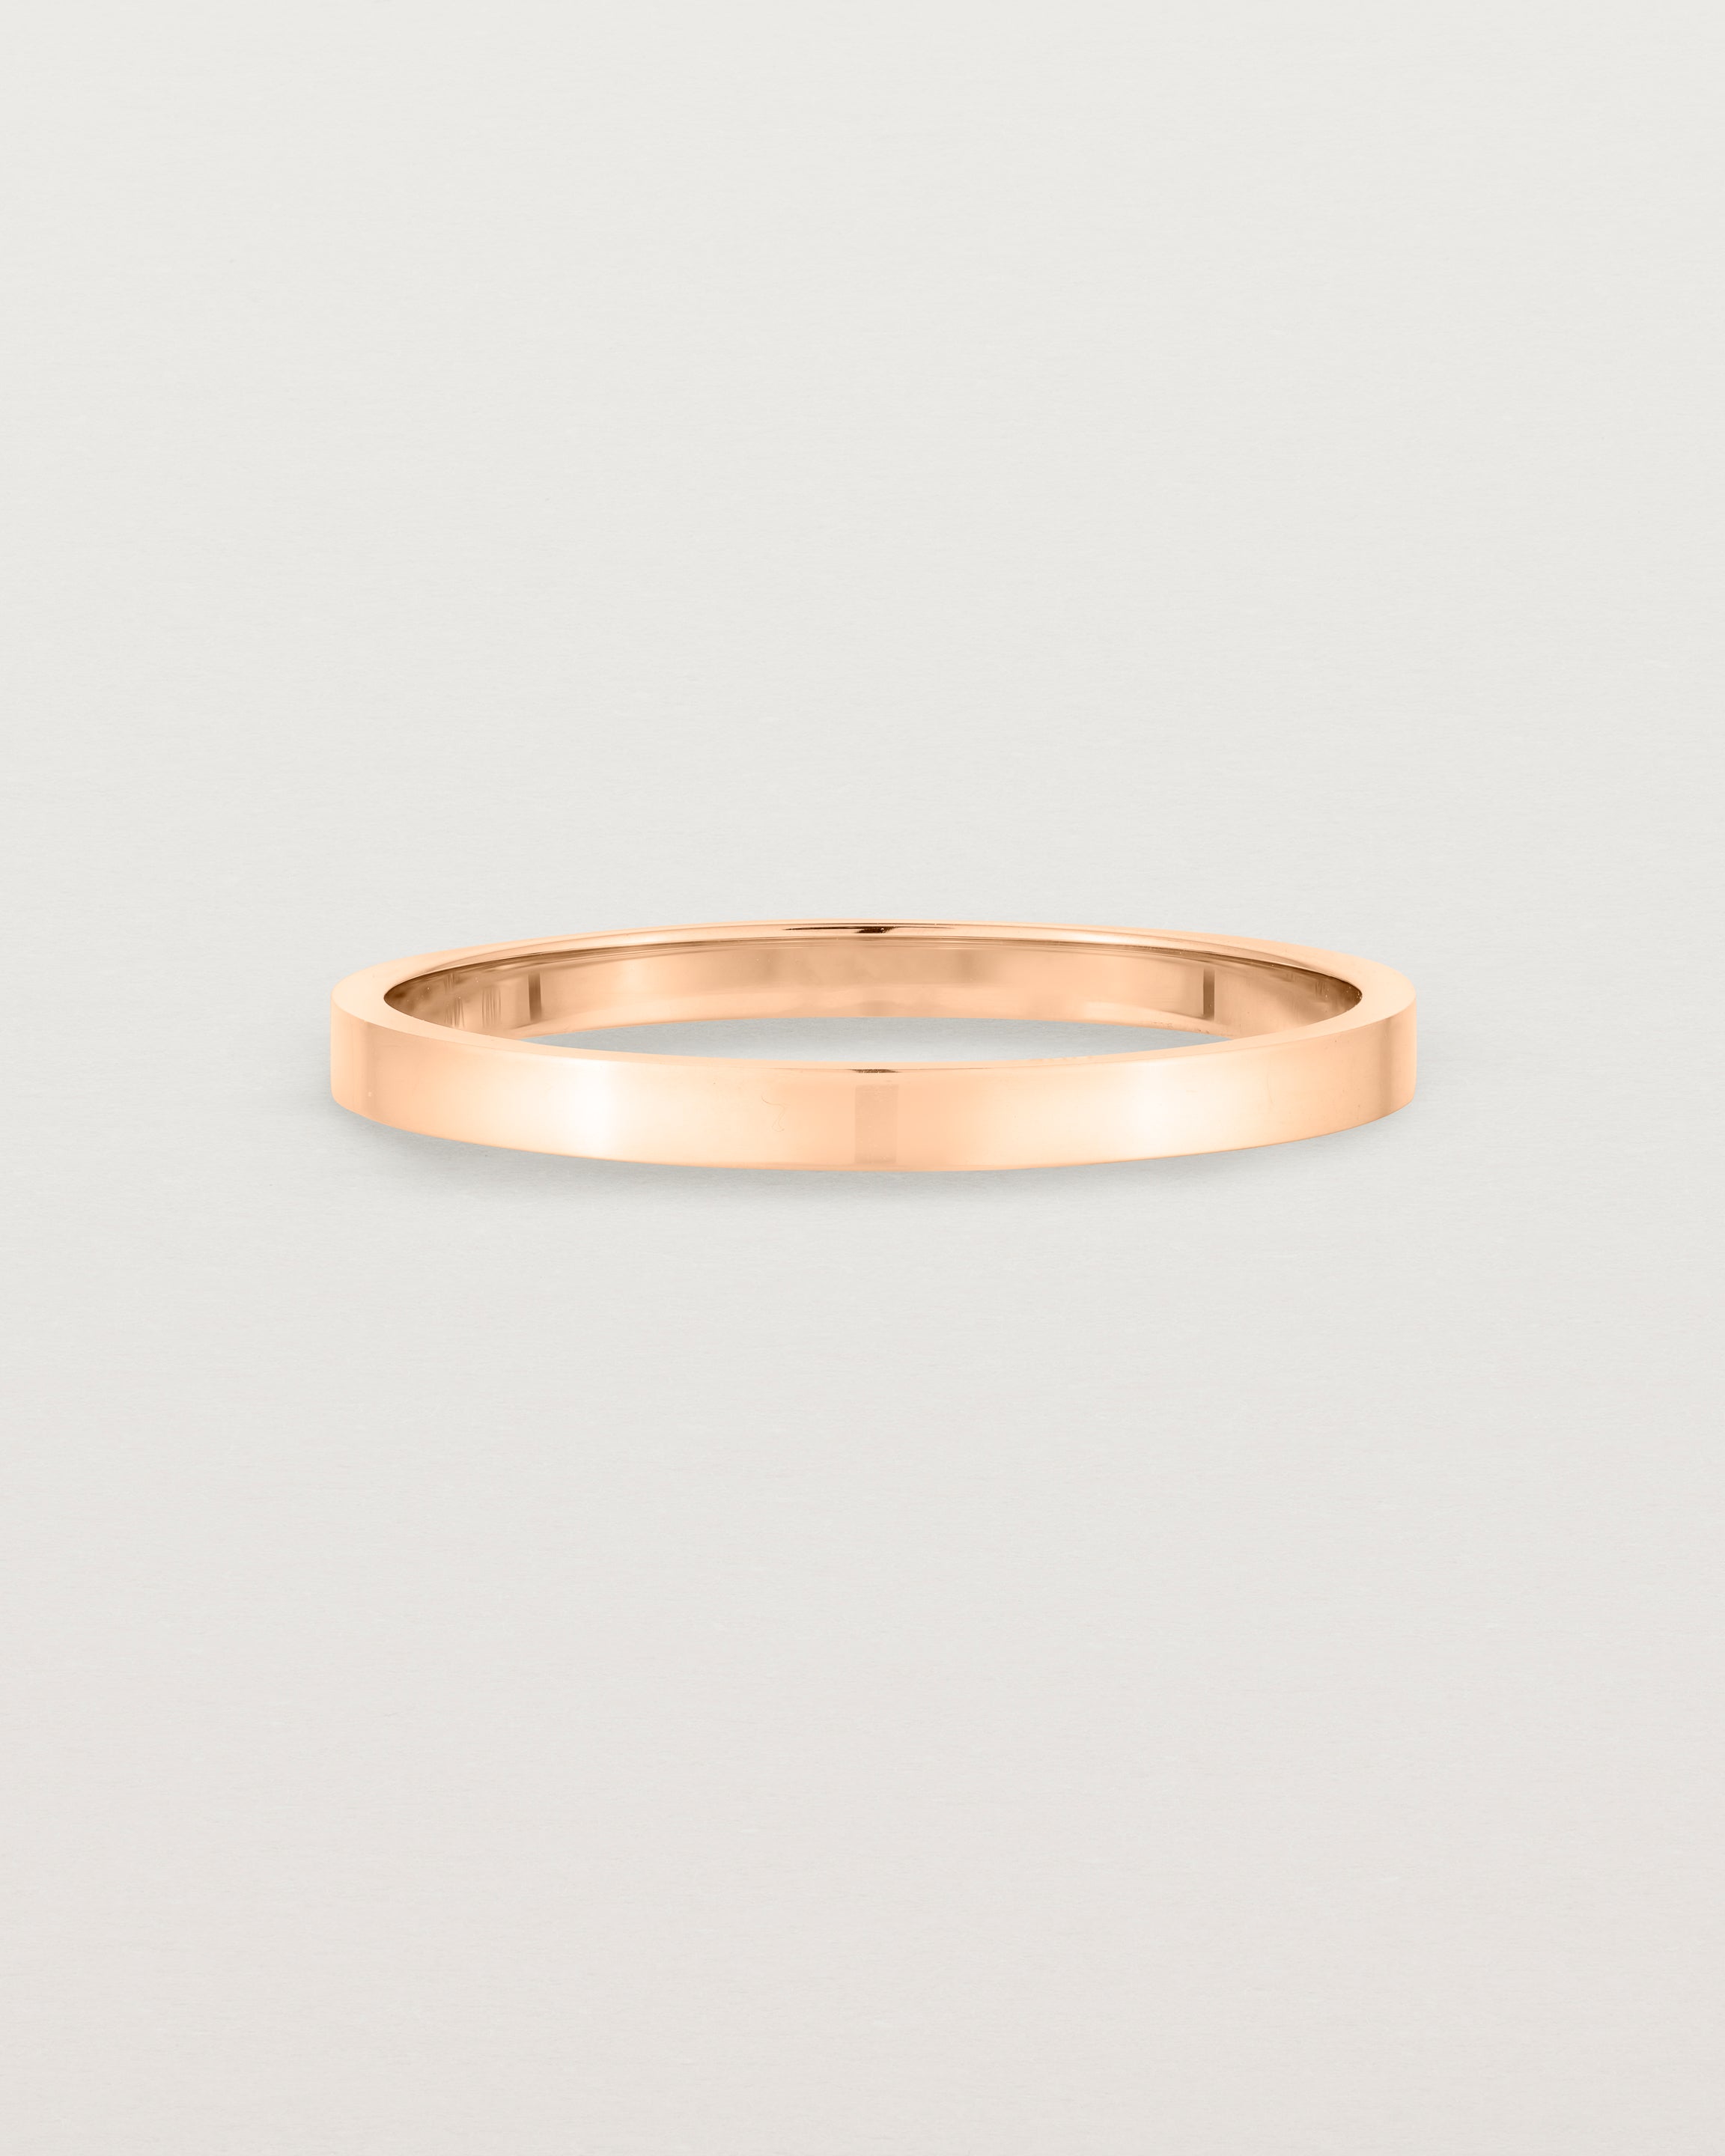 Our square profile, flat wedding band crafted in rose gold